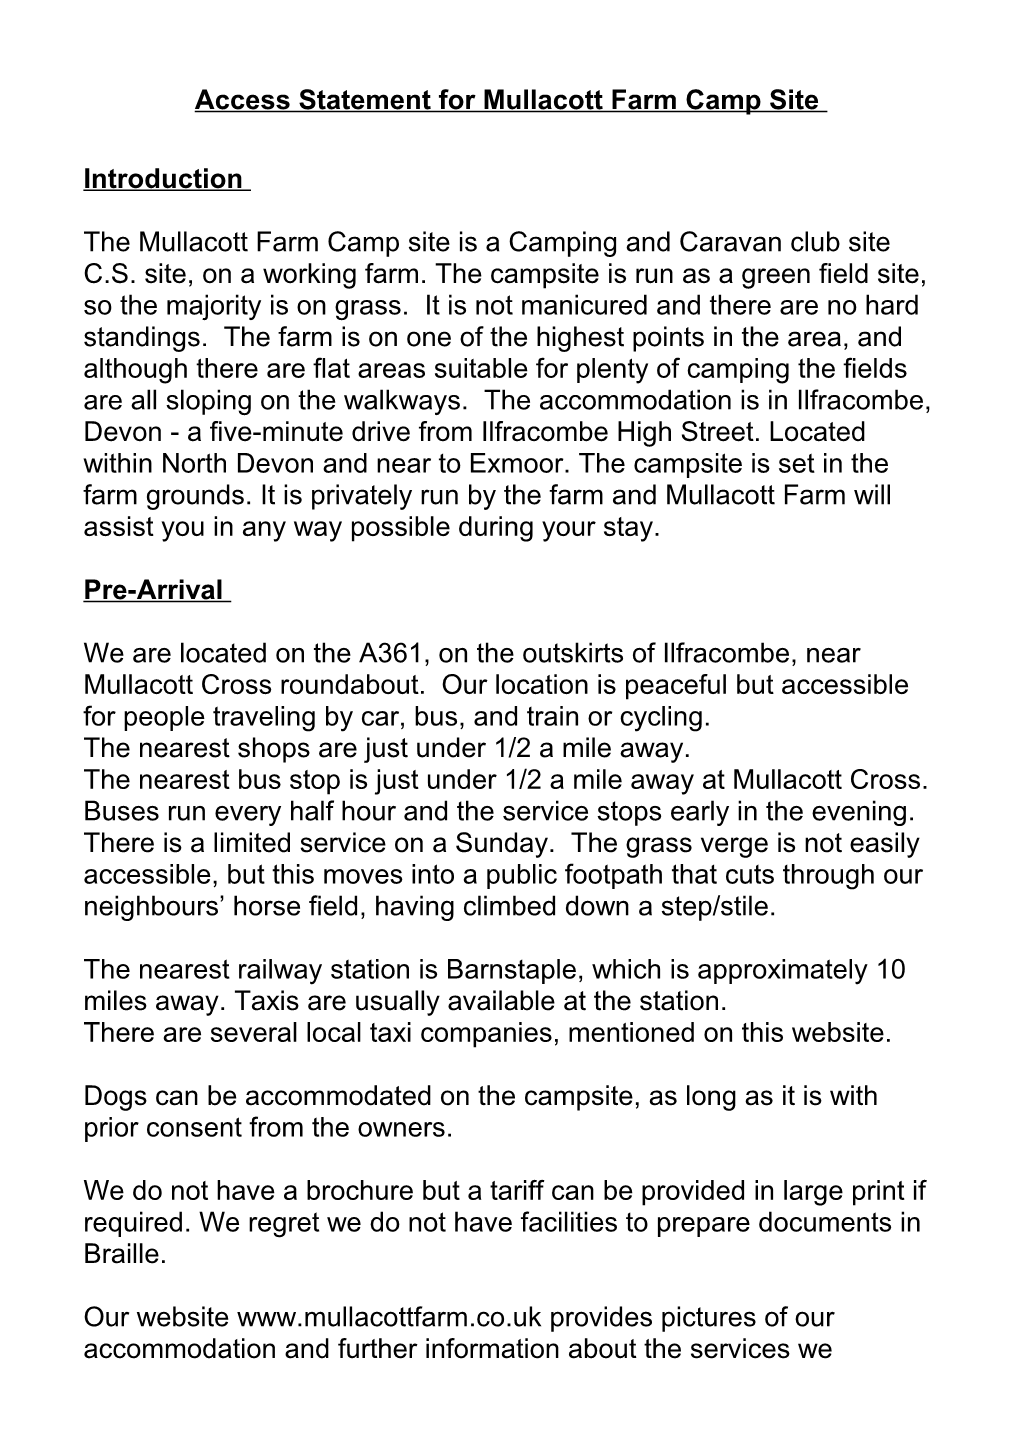 Access Statement for Mullacott Farm Camp Site